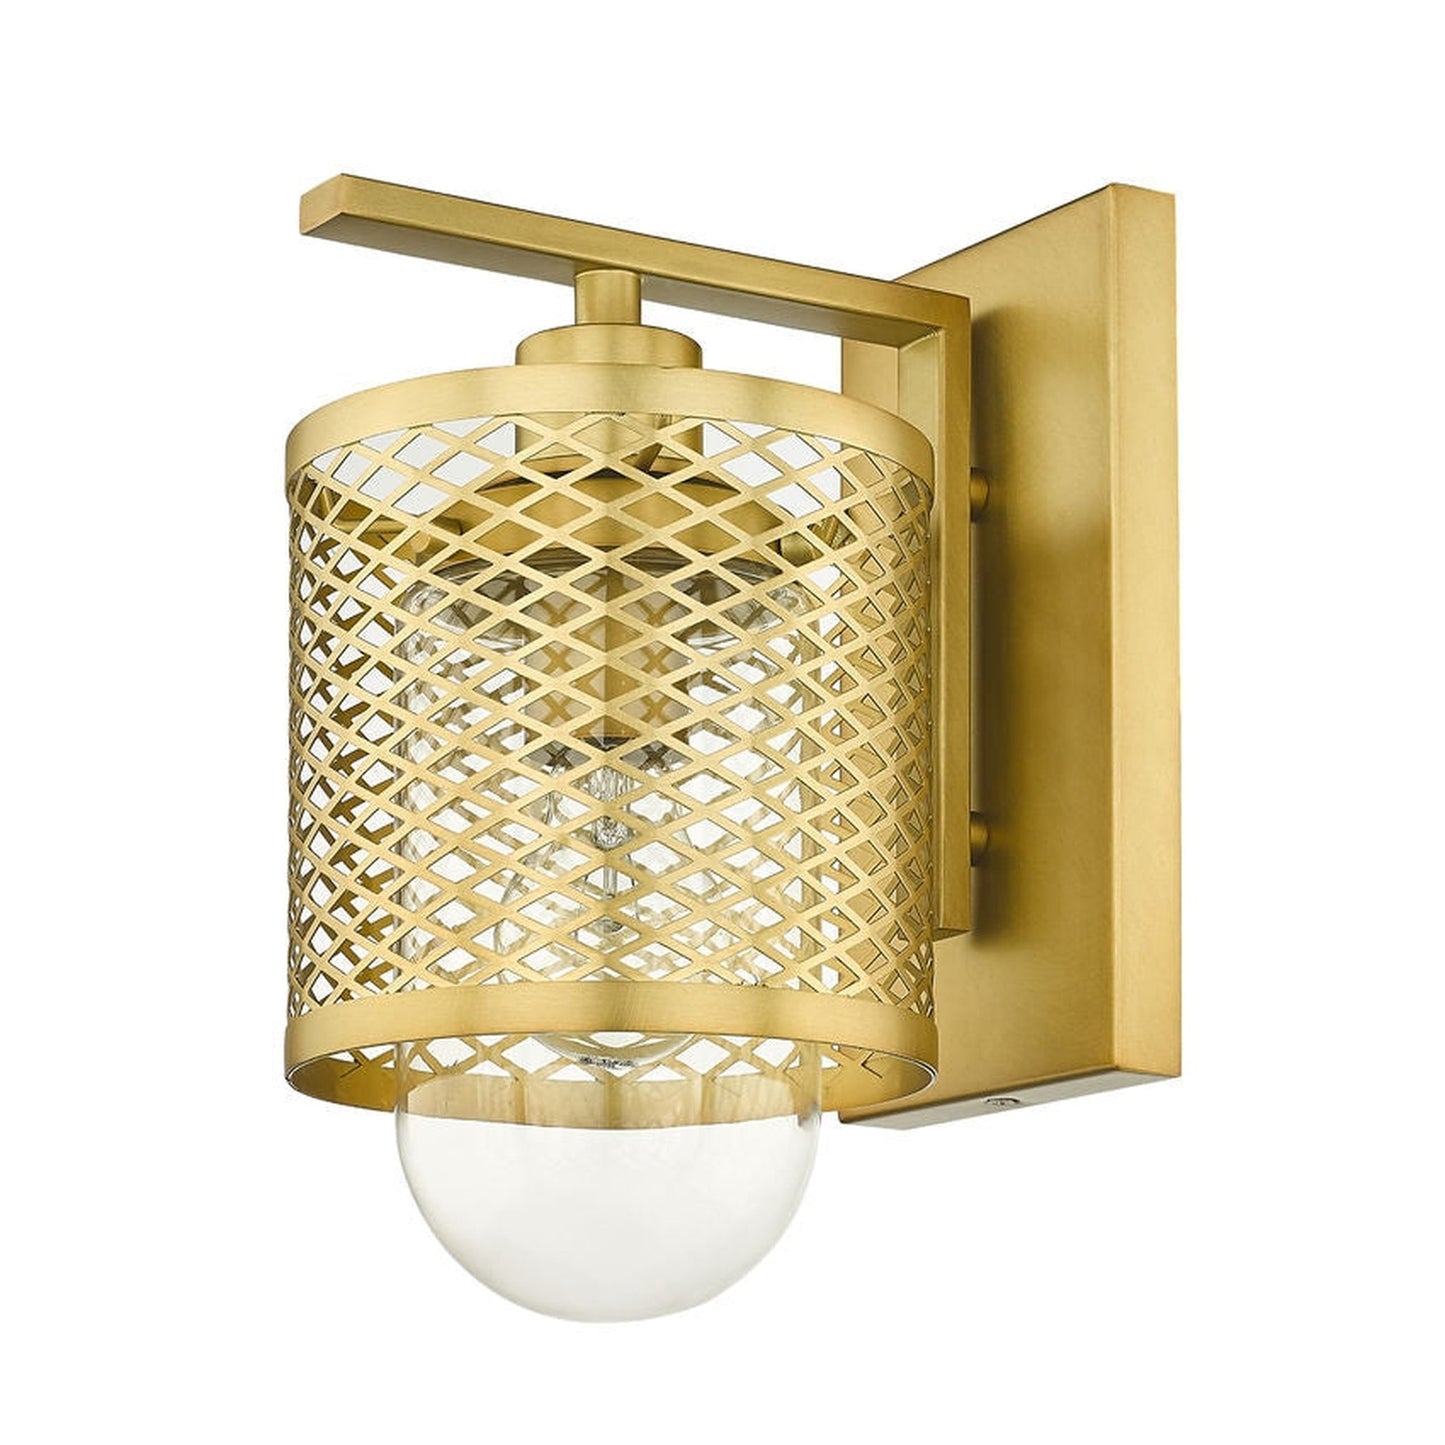 Z-Lite Kipton 6" 1-Light Rubbed Brass Wall Sconce With Clear Glass Shade